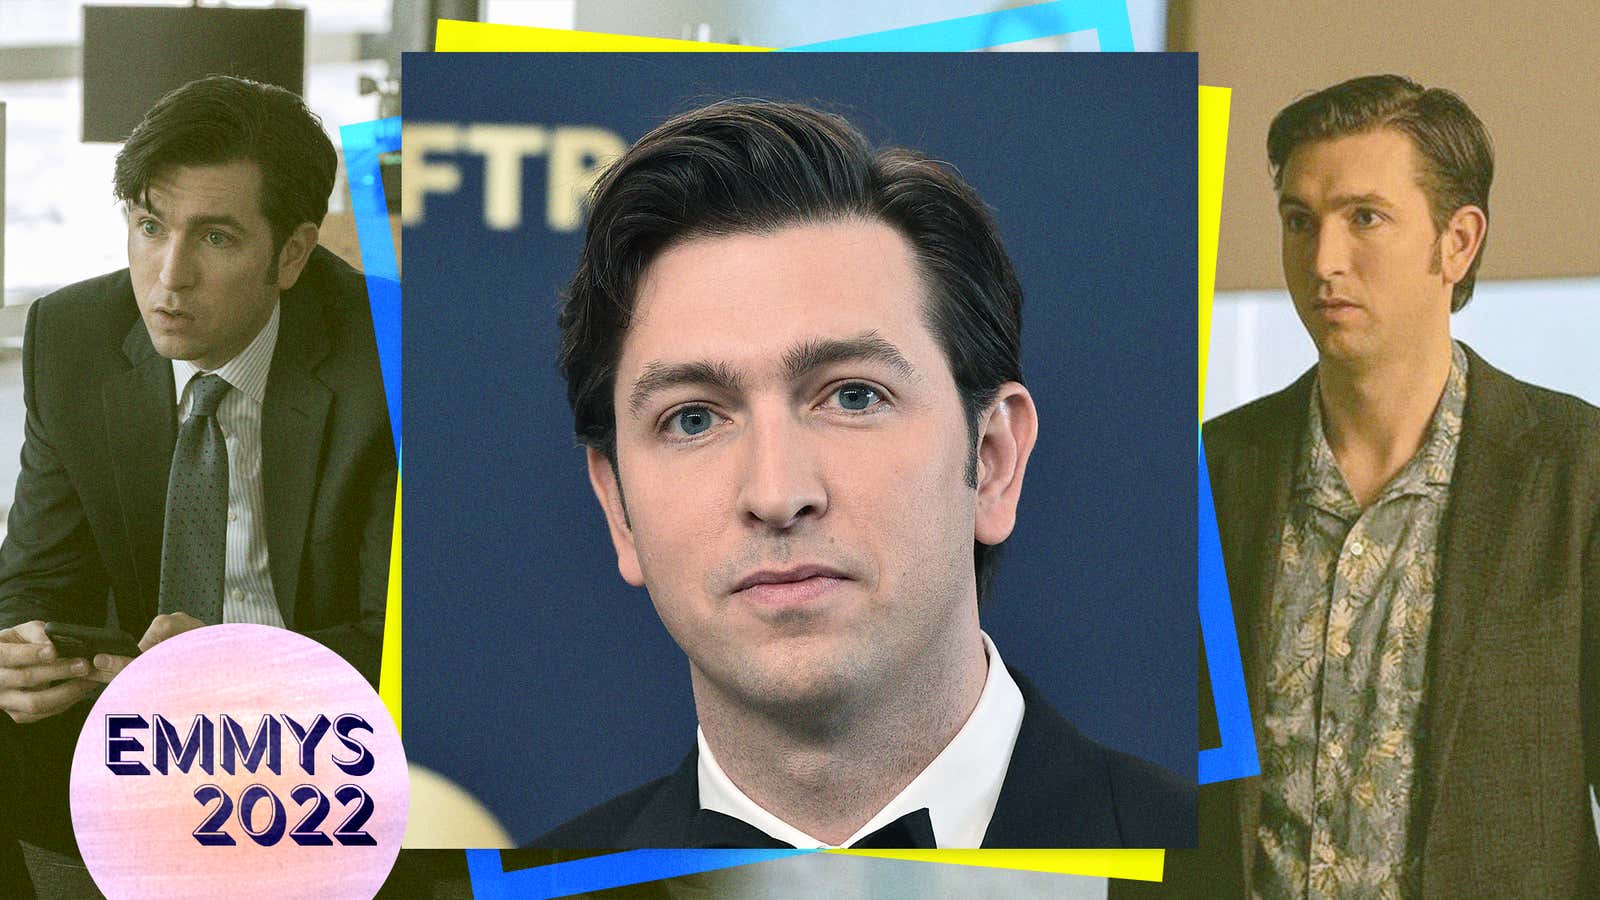 (From left to right) Nicholas Braun in Succession (Photo: Macall B. Polay/HBO), Braun attends the SAGindie Actors Only Brunch At Sundance Film Festival at Cafe Terigo on January 26, 2020 (Photo: Jordan Strauss/Invision/AP), Braun in Succession (Photo: Macall B. Polay/HBO)